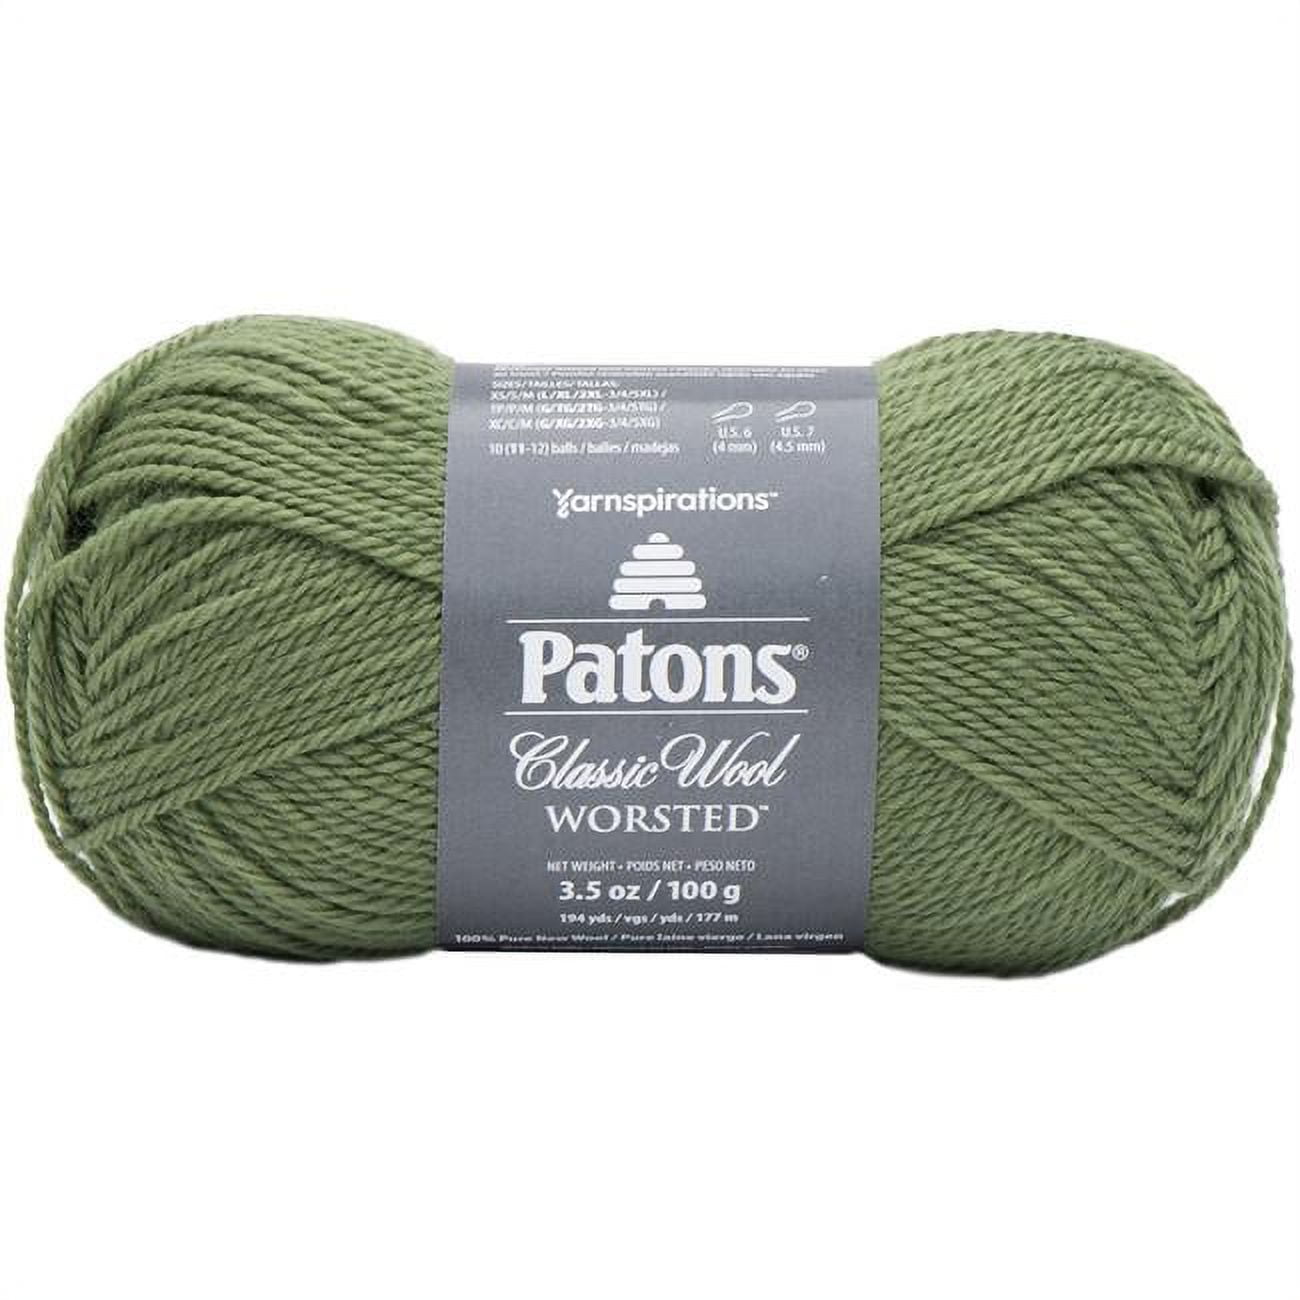 PANSY - Patons Classic Wool Worsted Yarn Medium Weight (4). 100